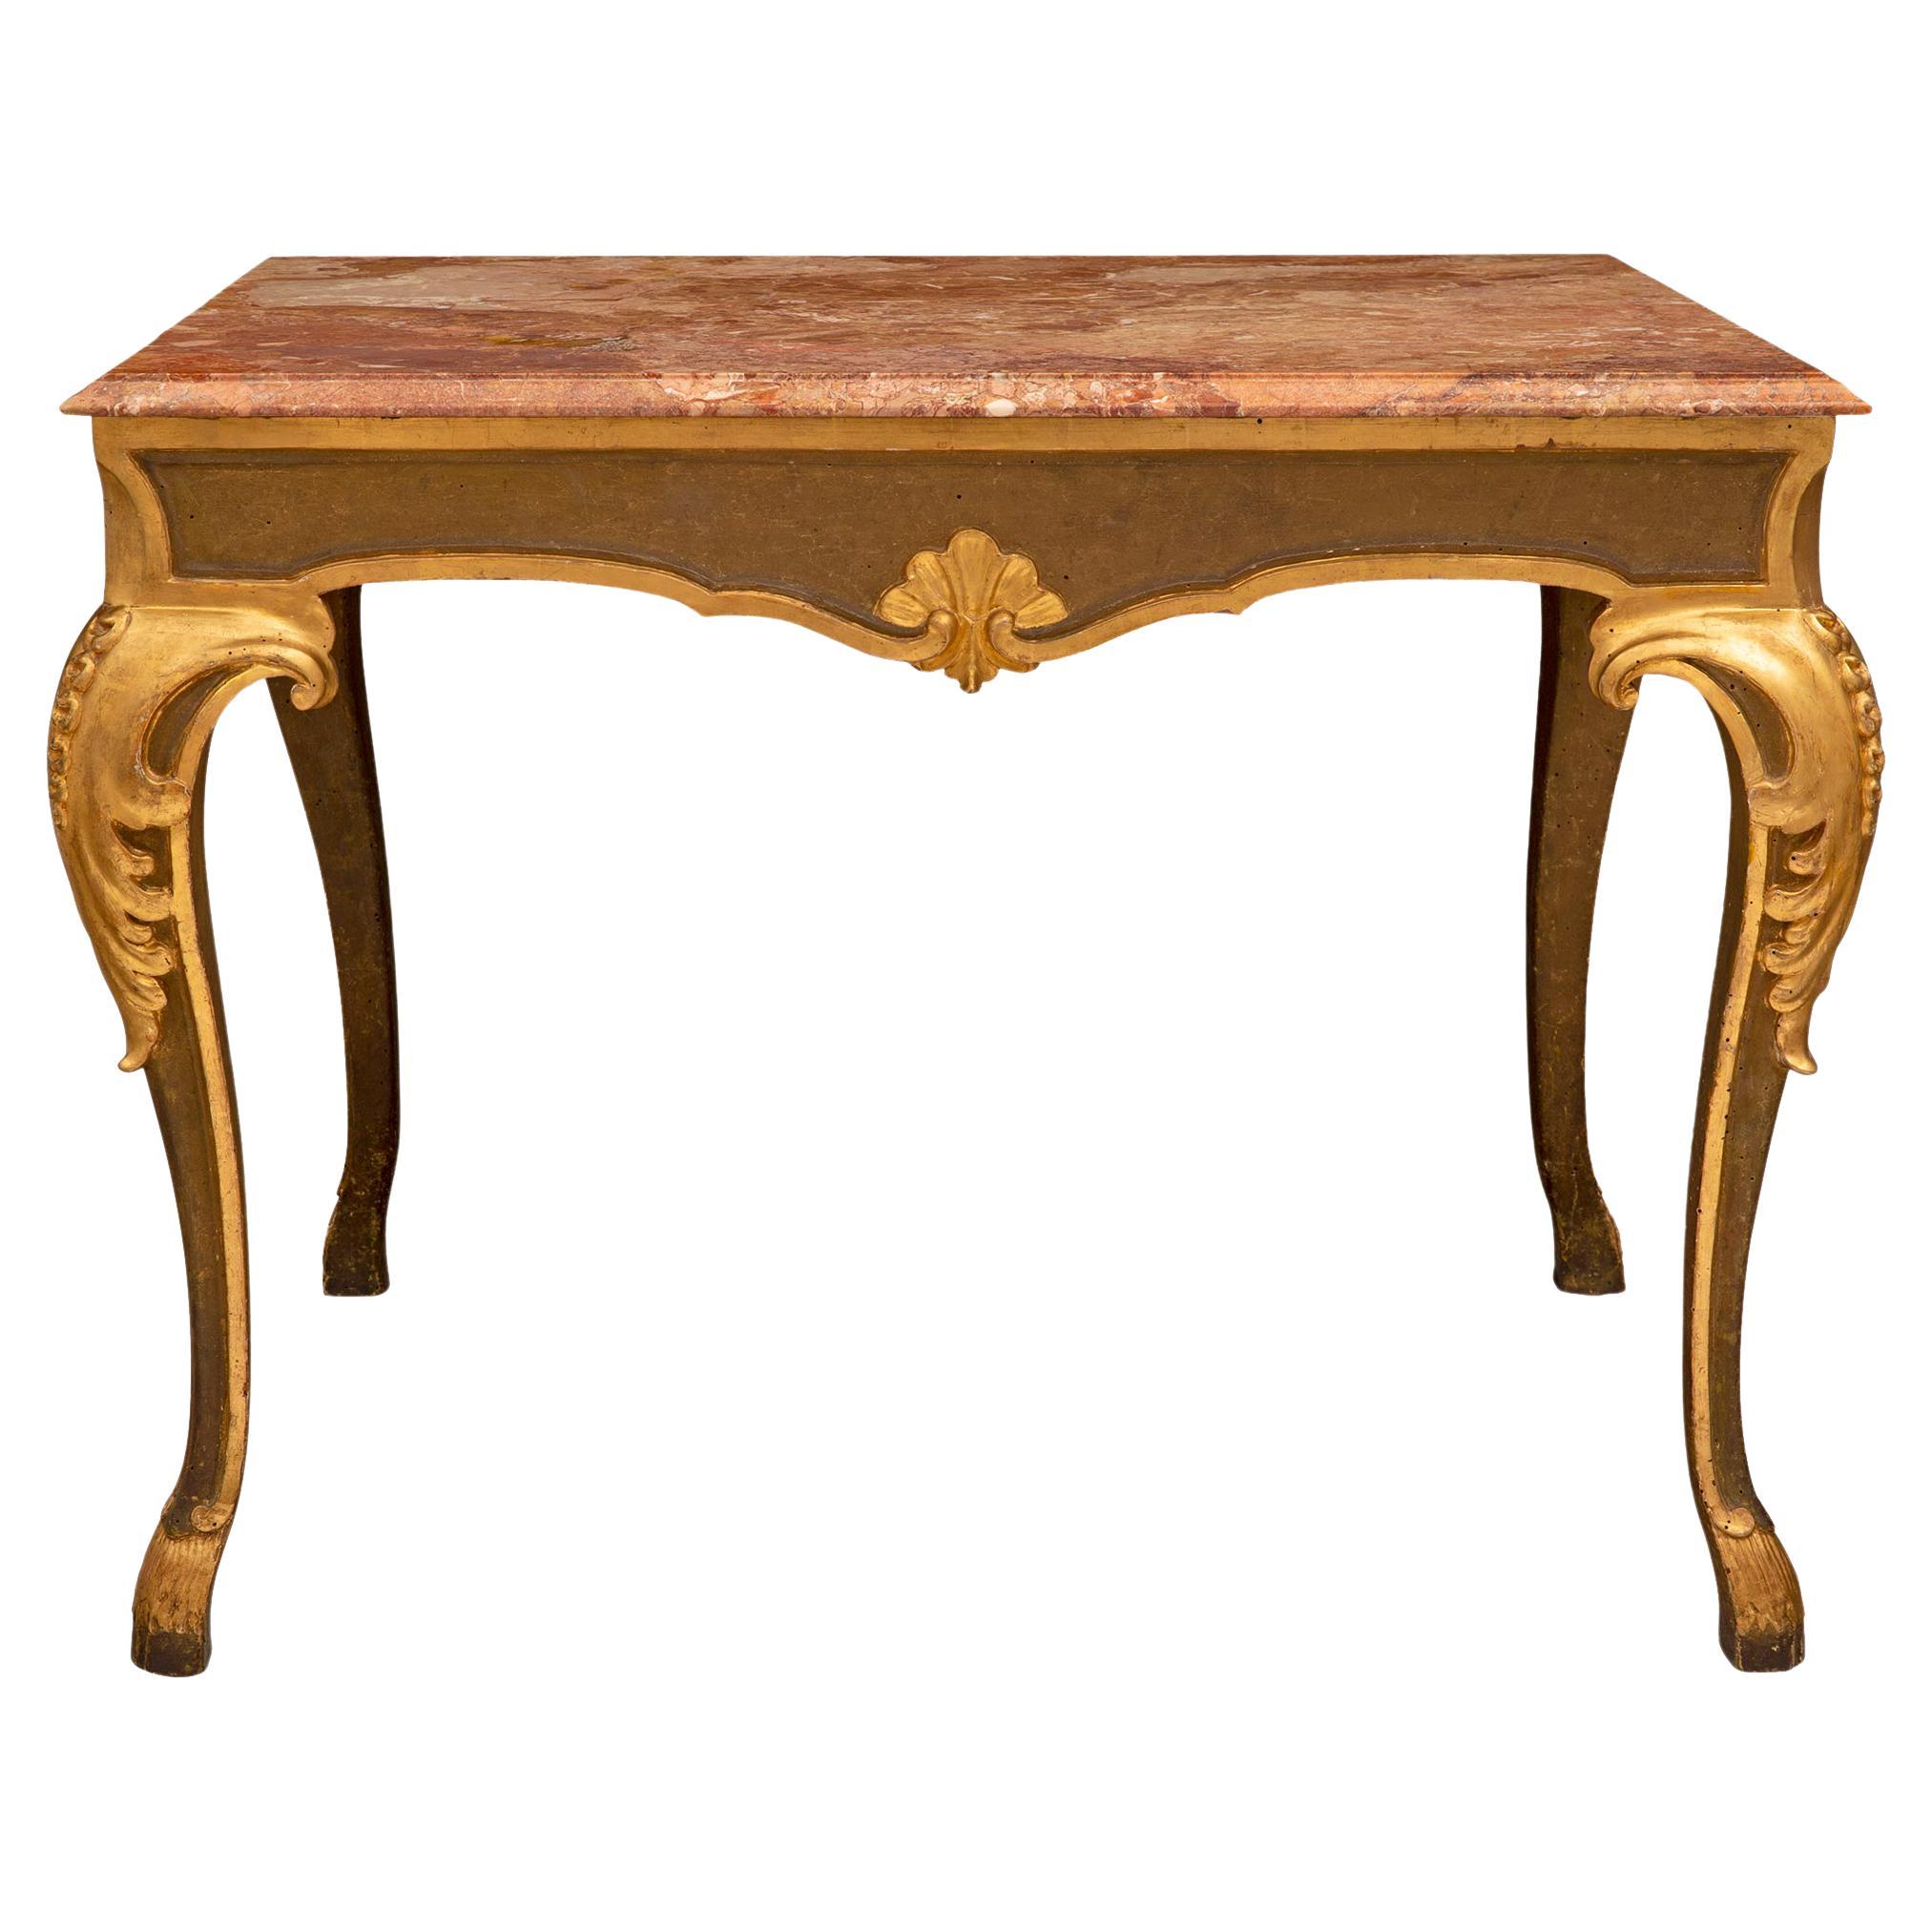 Italian 18th Century Louis XV Period Polychrome and Giltwood Center Table